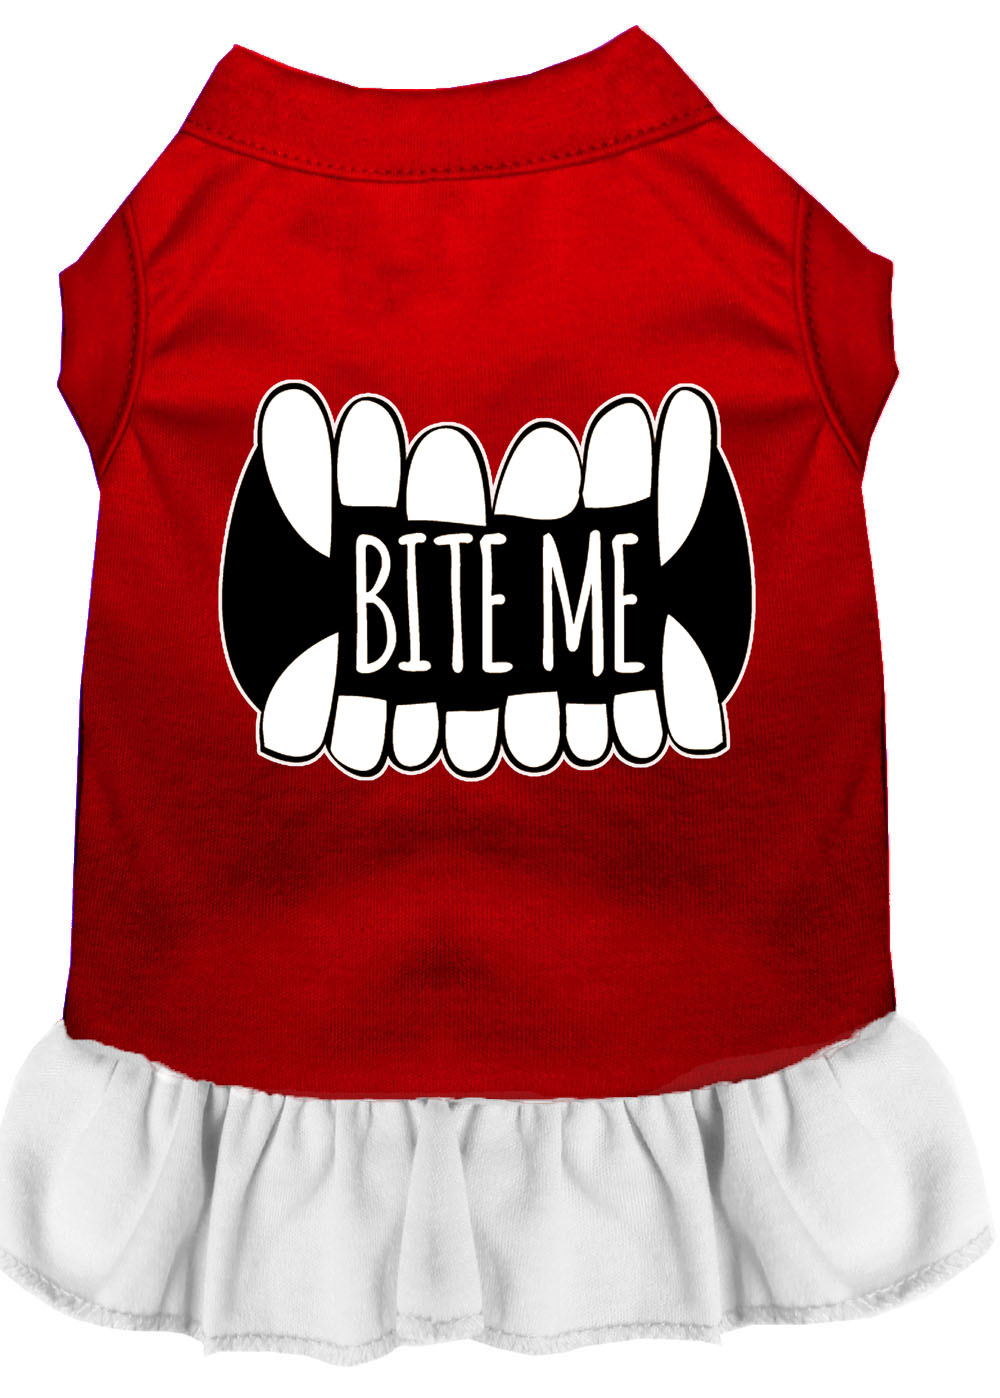 Bite Me Screen Print Dog Dress Red with White Med